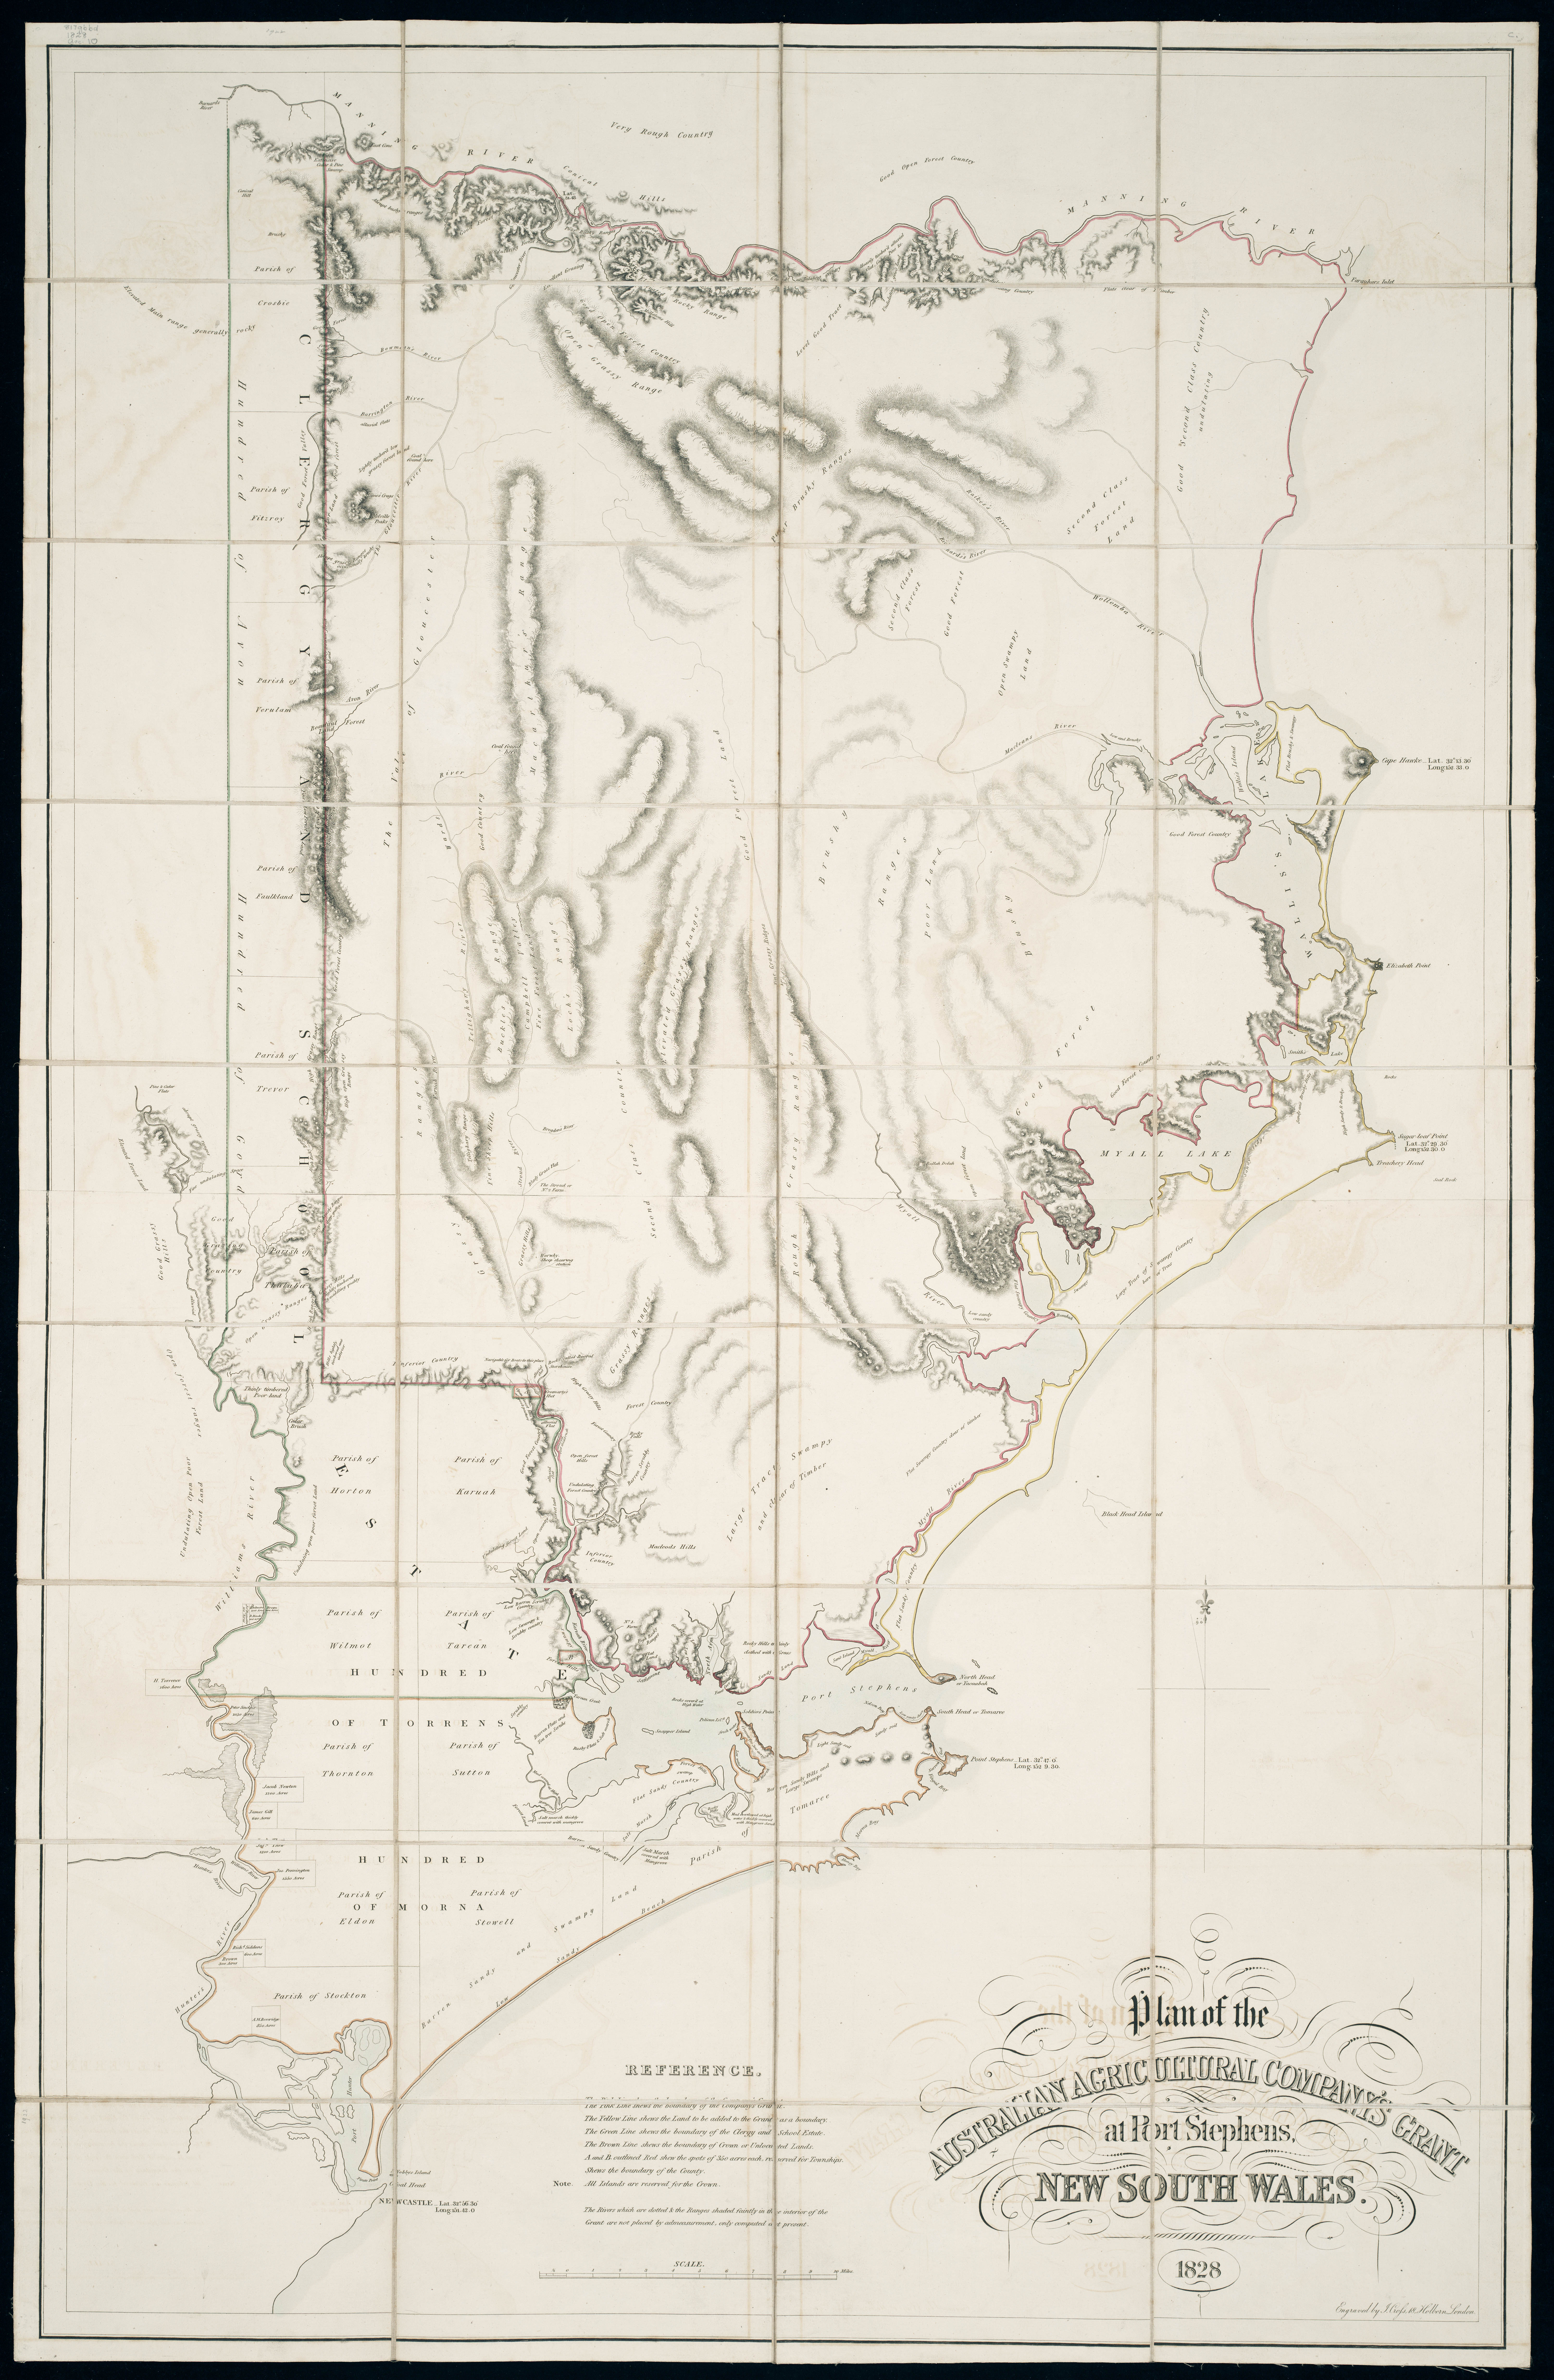 Plan of the Australian Agricultural Company's grant at Port Stephens,New South Wales. (London: J. Cross, 1828). Courtesy of the Alexander Turnbull Library, Wellington, N.Z.